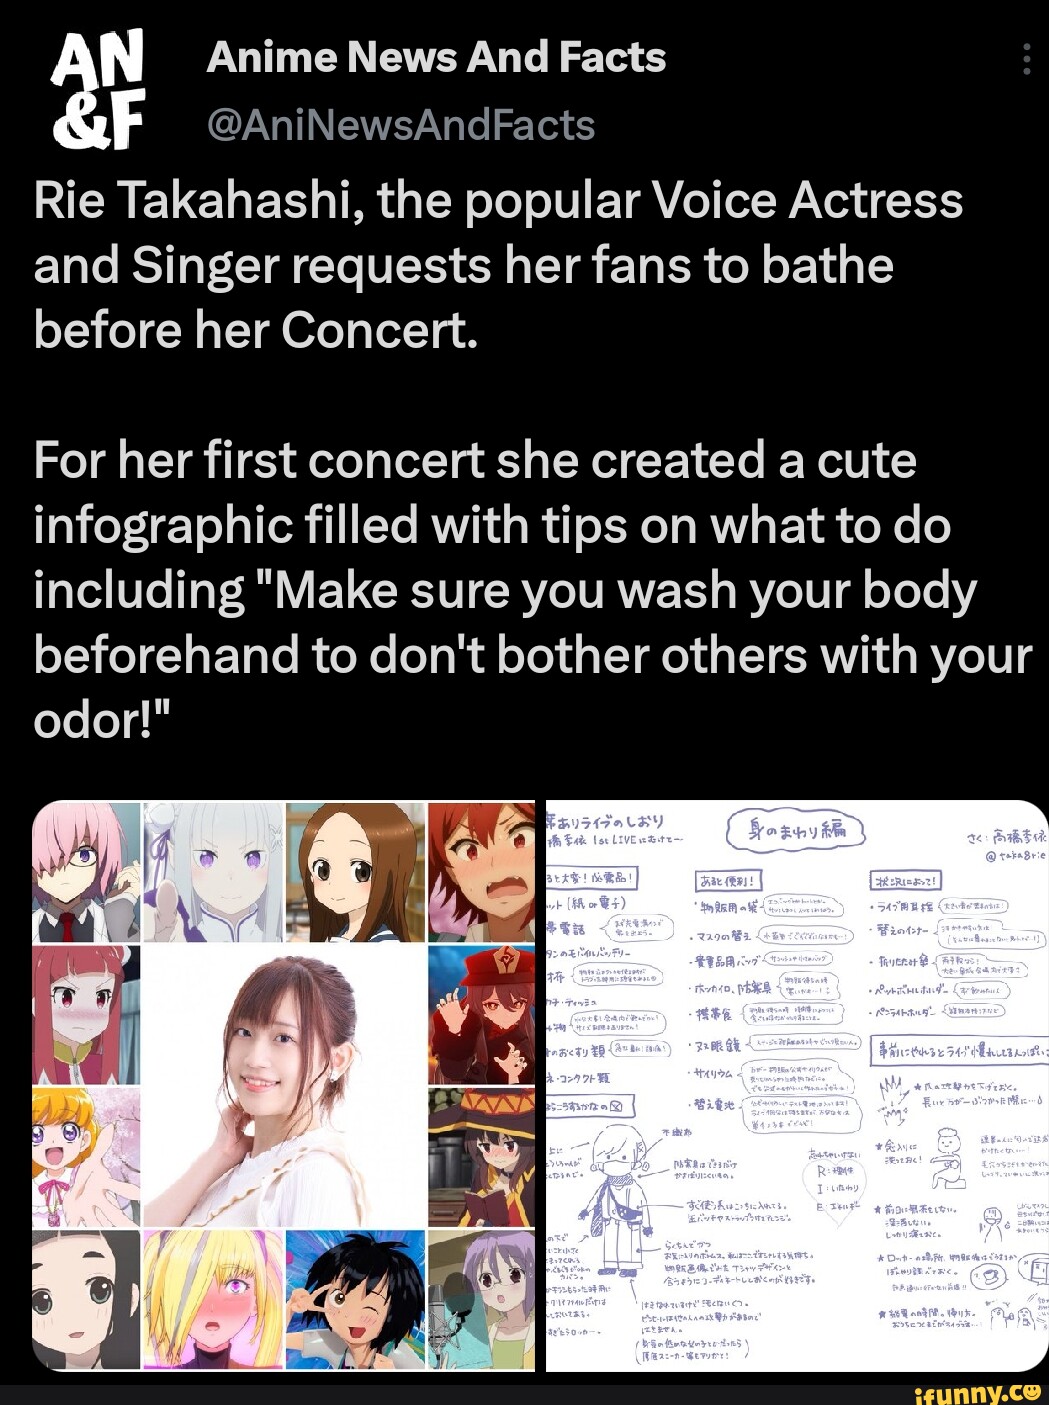 Anime News And Facts AniNewsAndFacts before her Concert odor Rie  Takahashi the popular Voice Actress and